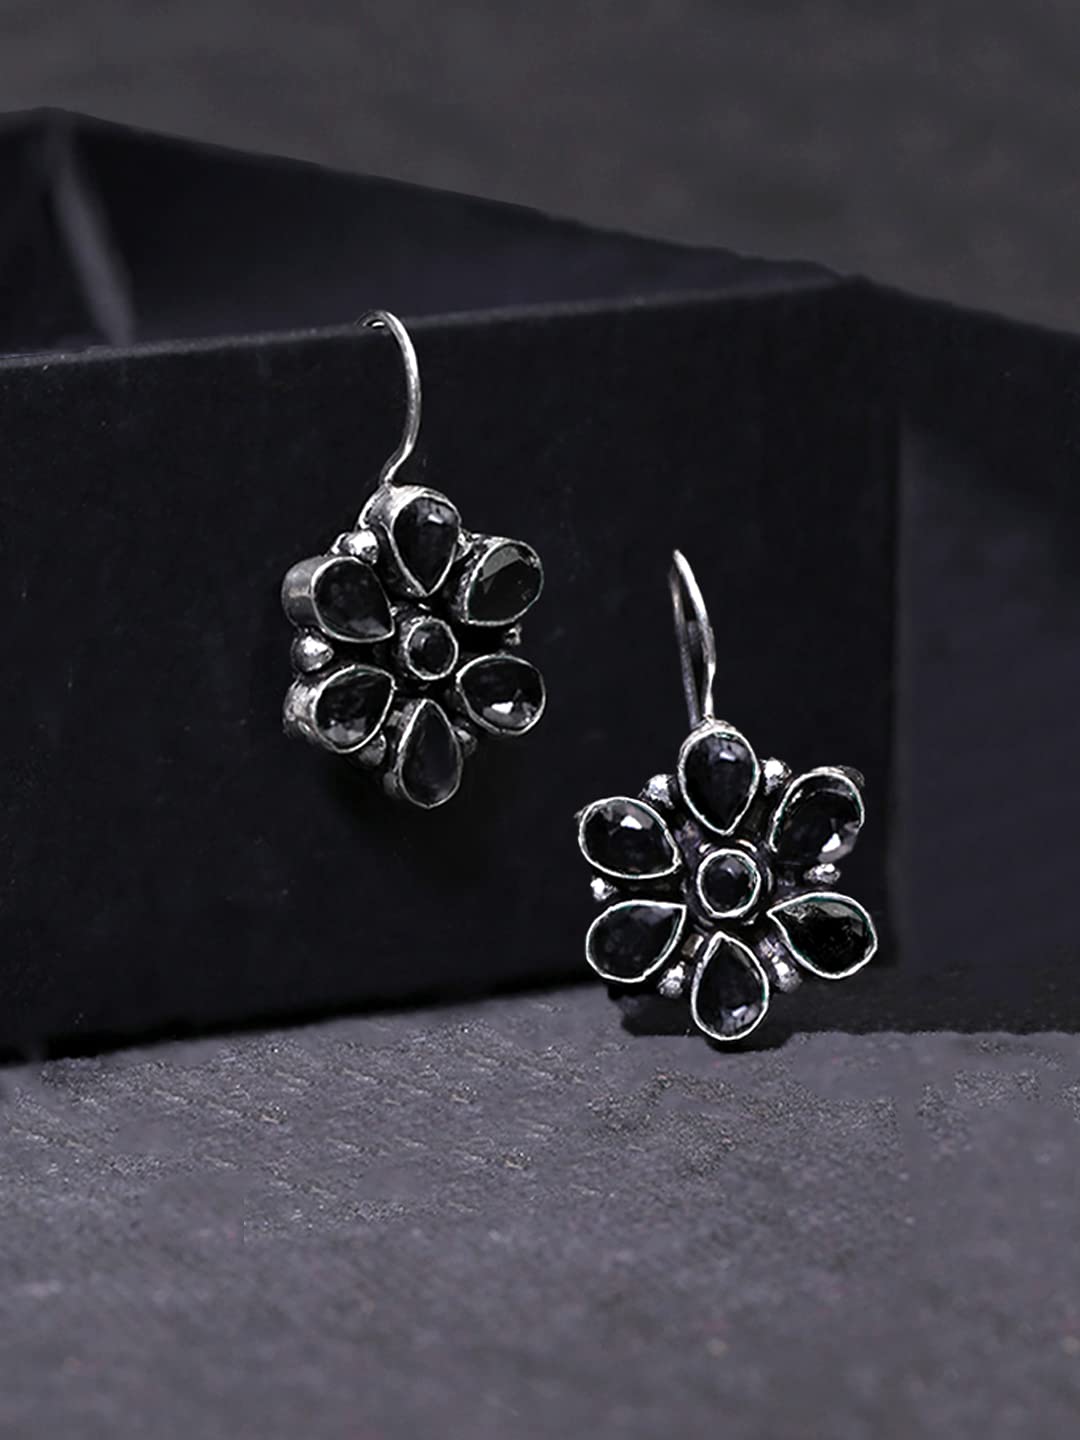 Details more than 120 black stone drop earrings latest